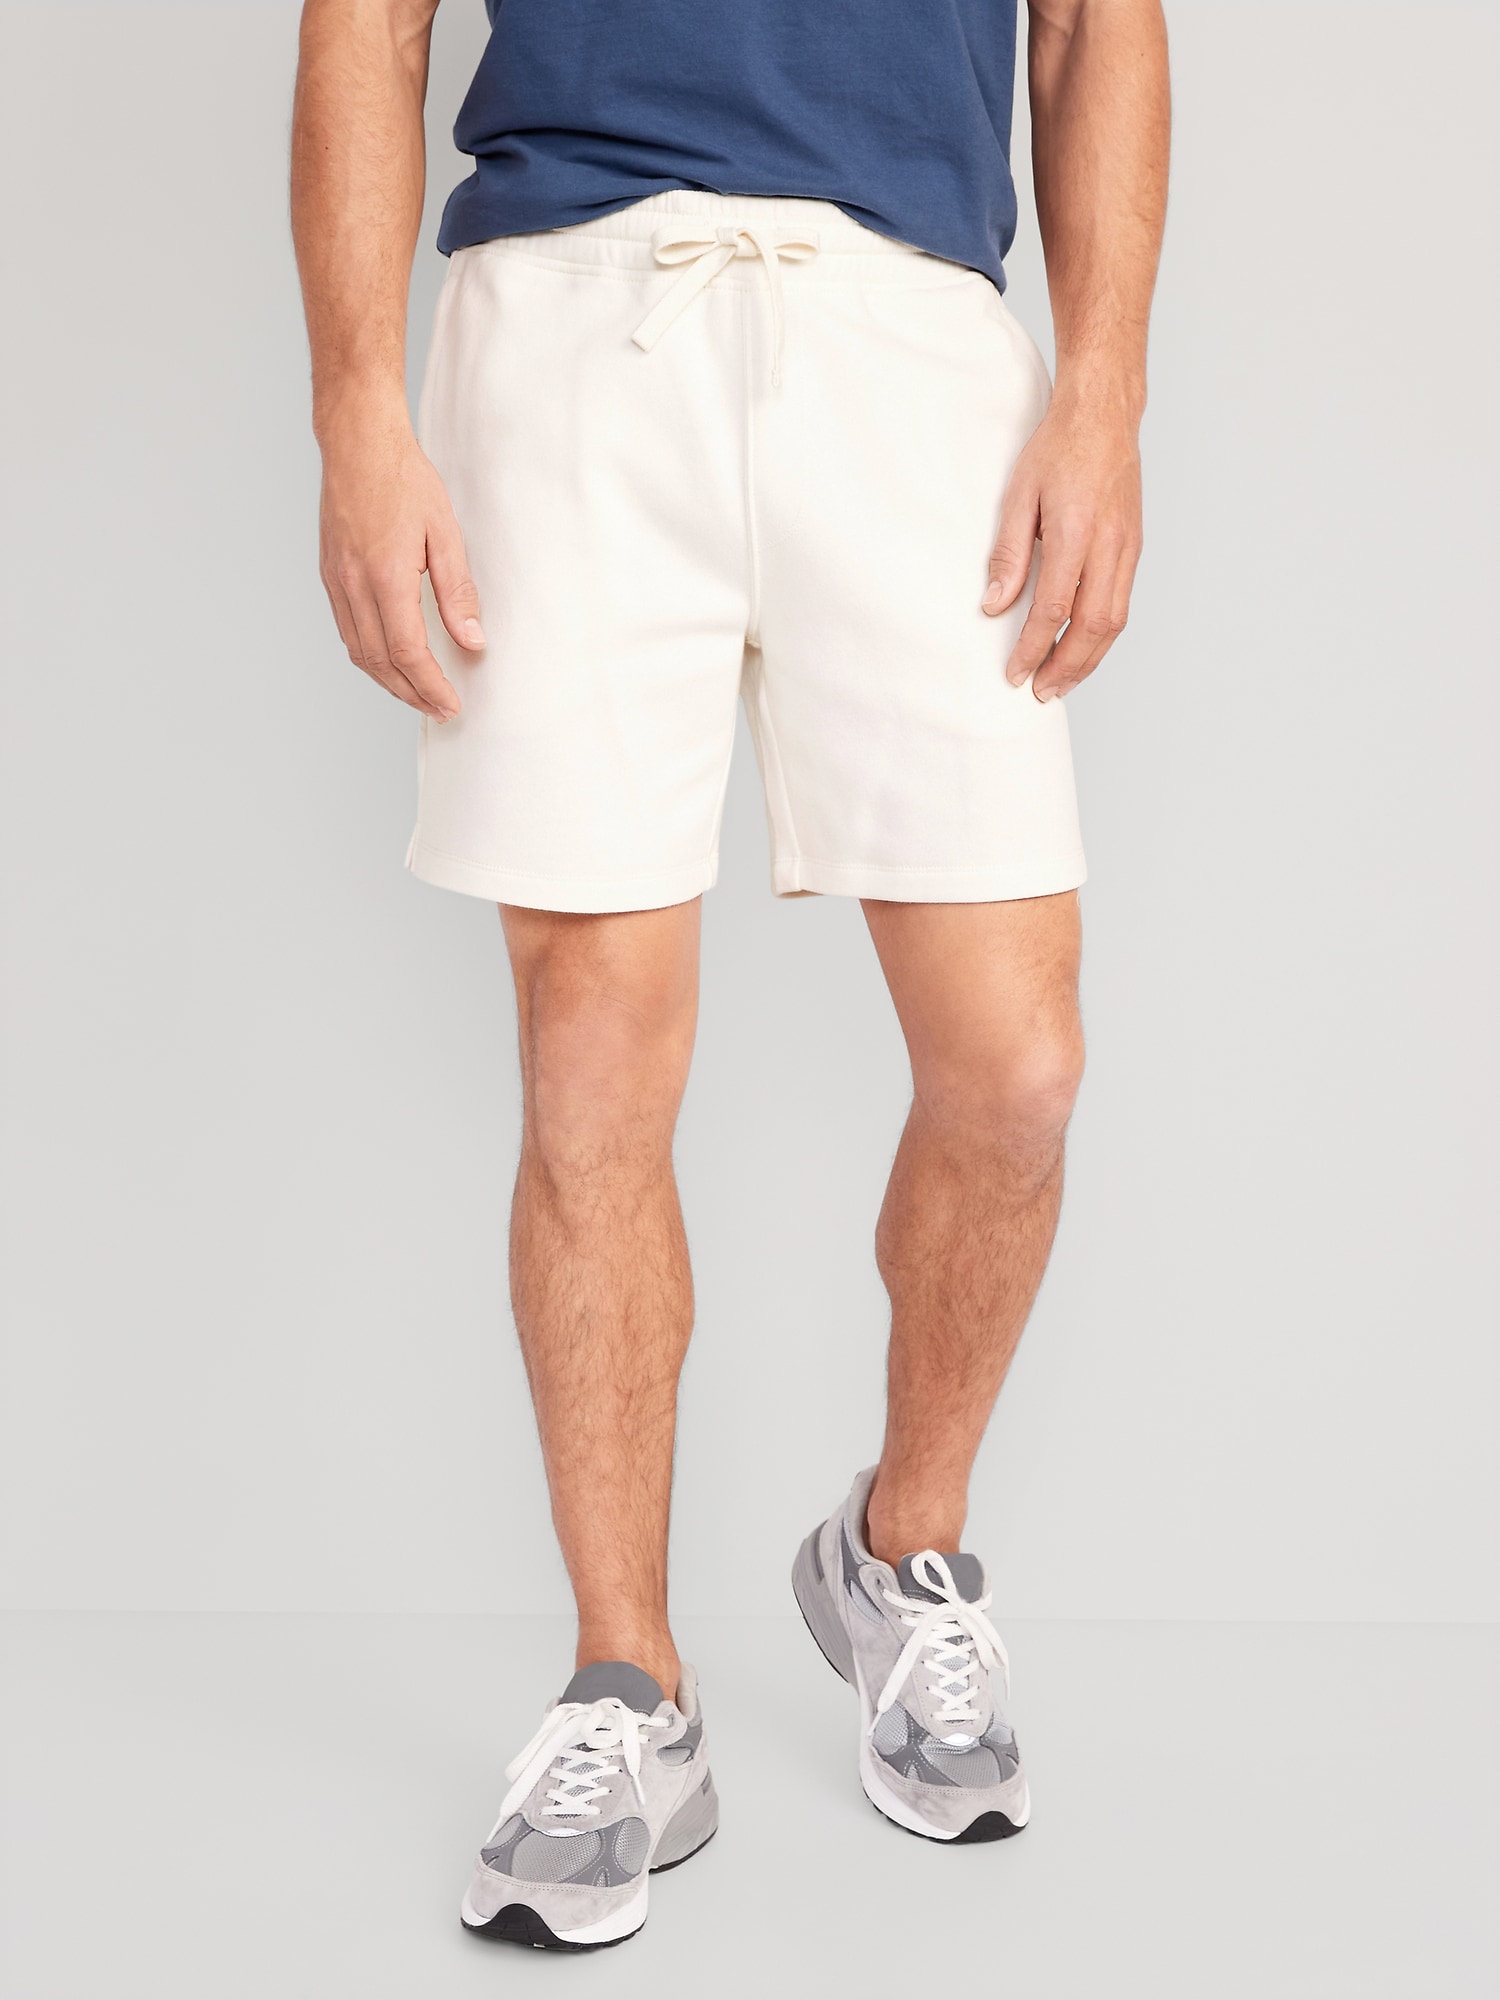 Old Navy Garment-Washed Fleece Sweat Shorts for Men -- 7-inch inseam white. 1